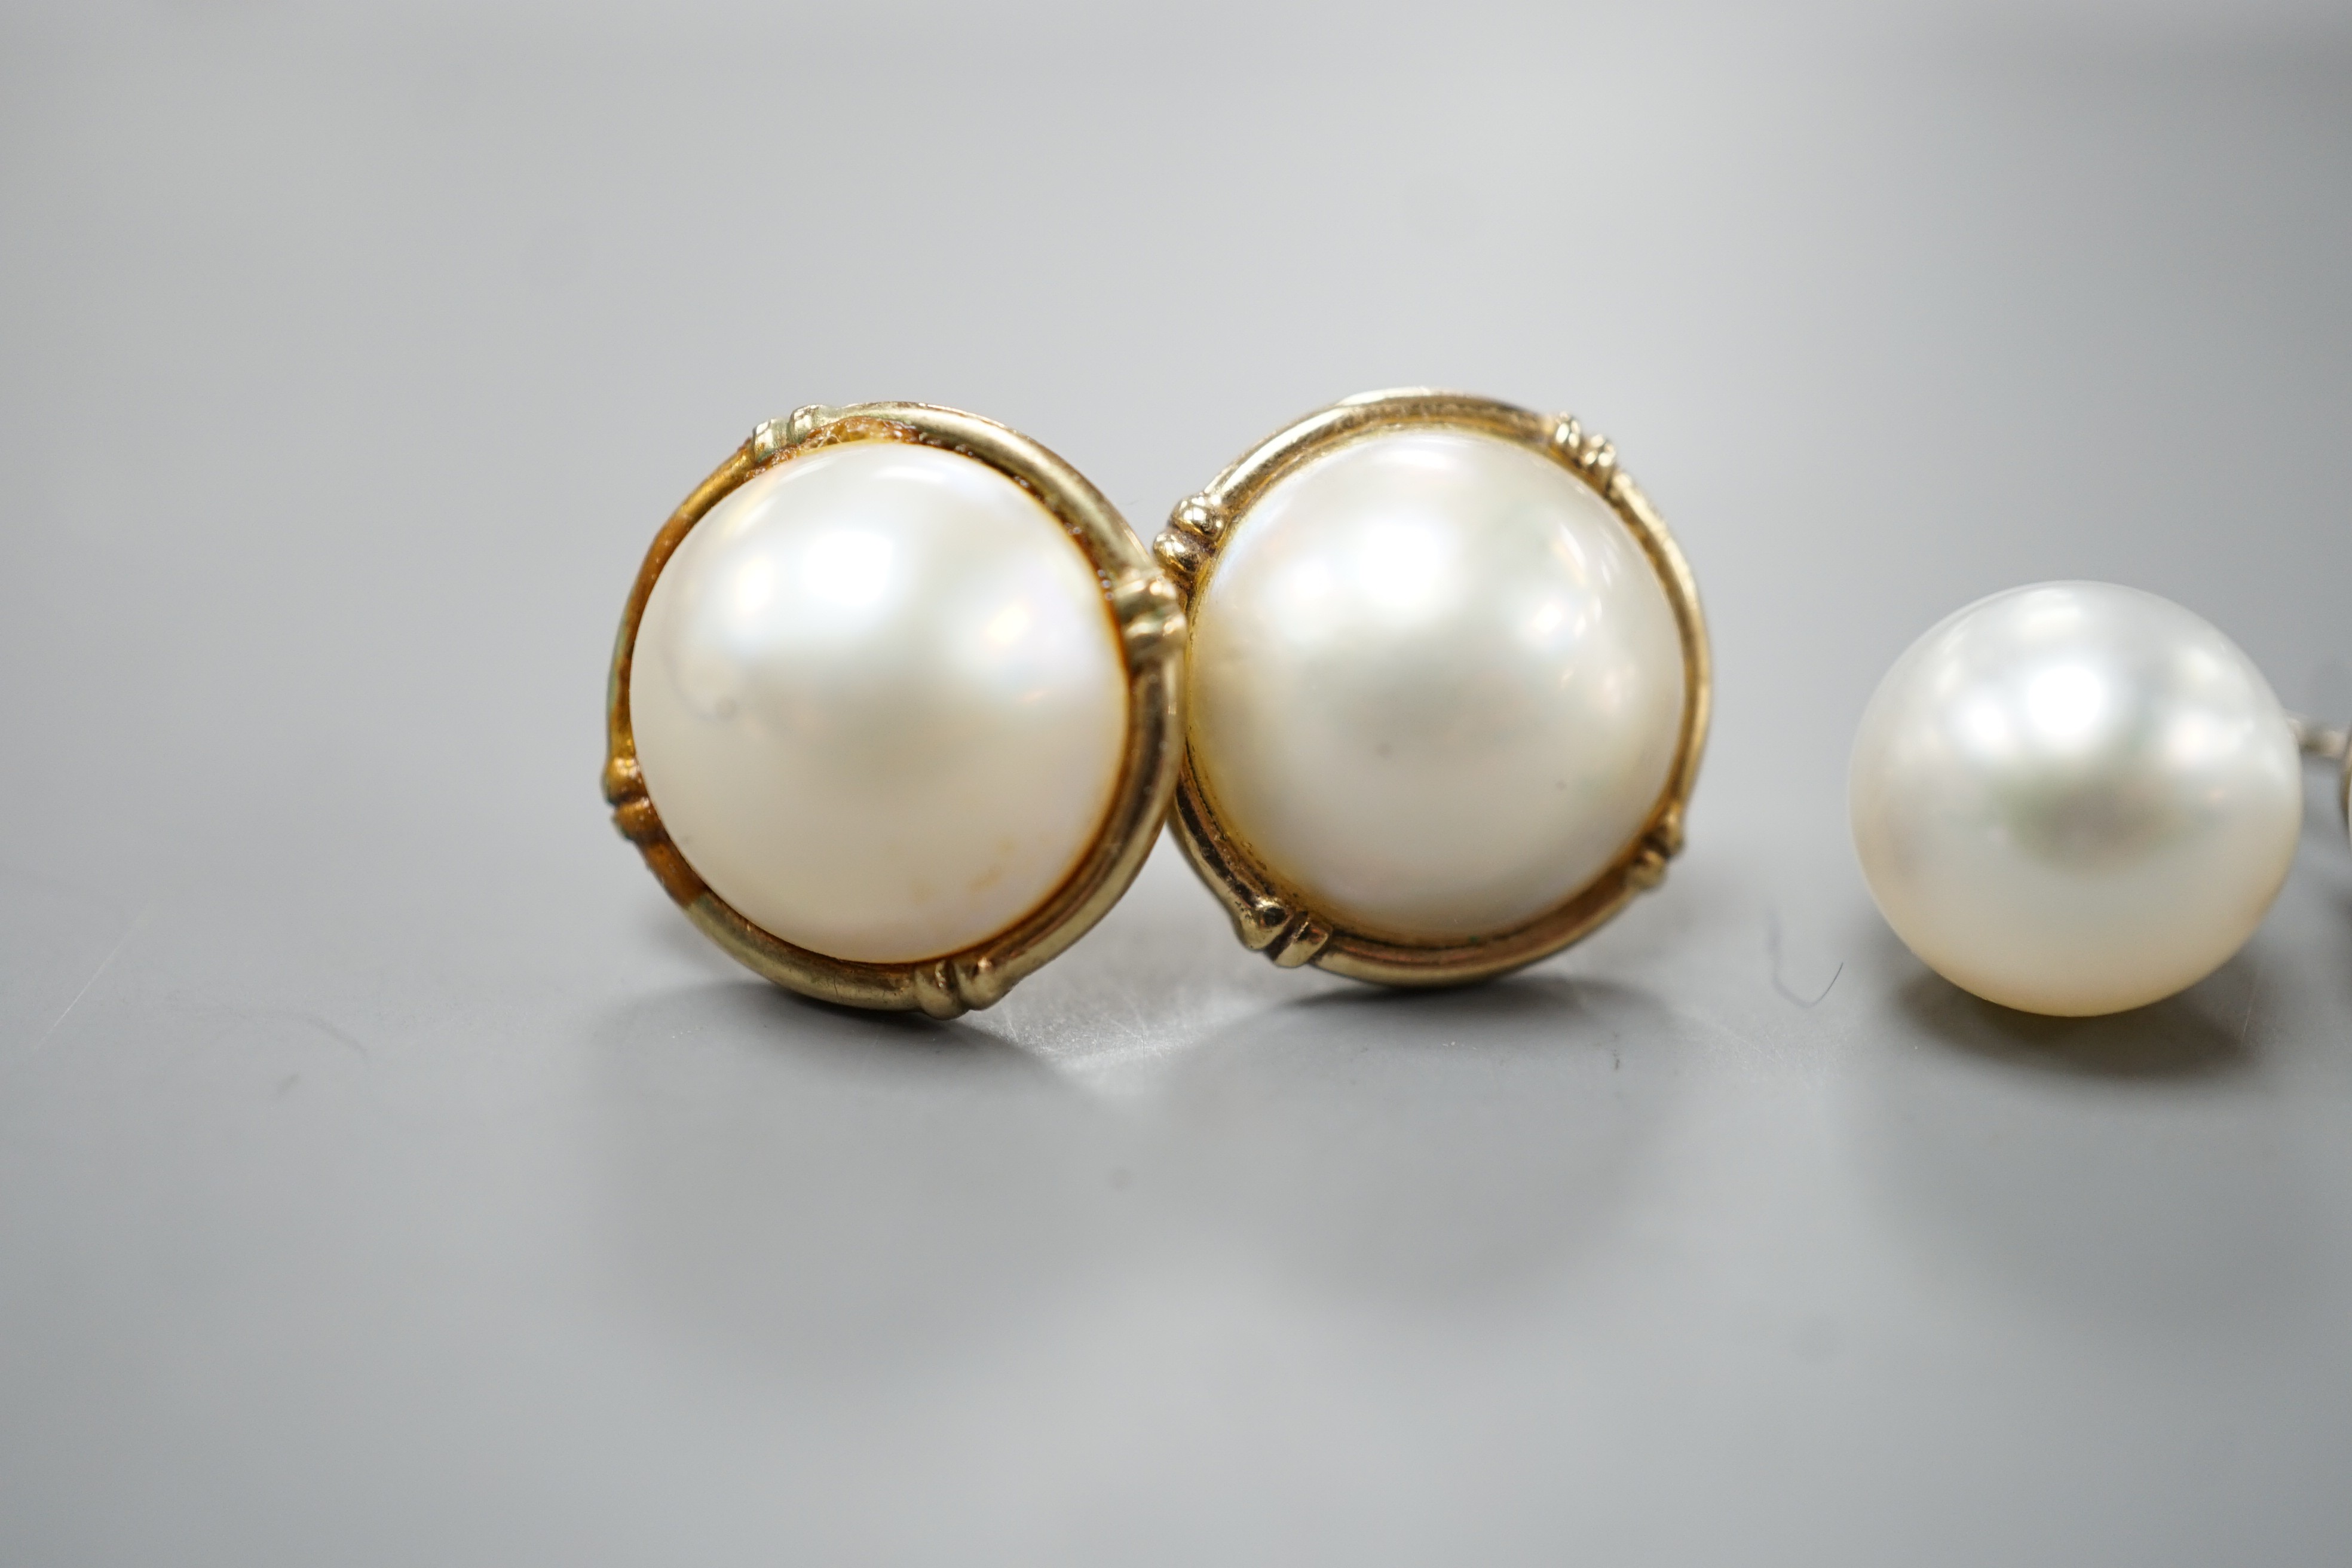 A pair of 18ct and cultured pear ear studs, a pair 9ct gold and mabe pearl ear studs and a pair of 18k, cultured pearl and diamond set ear studs (all lacking butterflies).